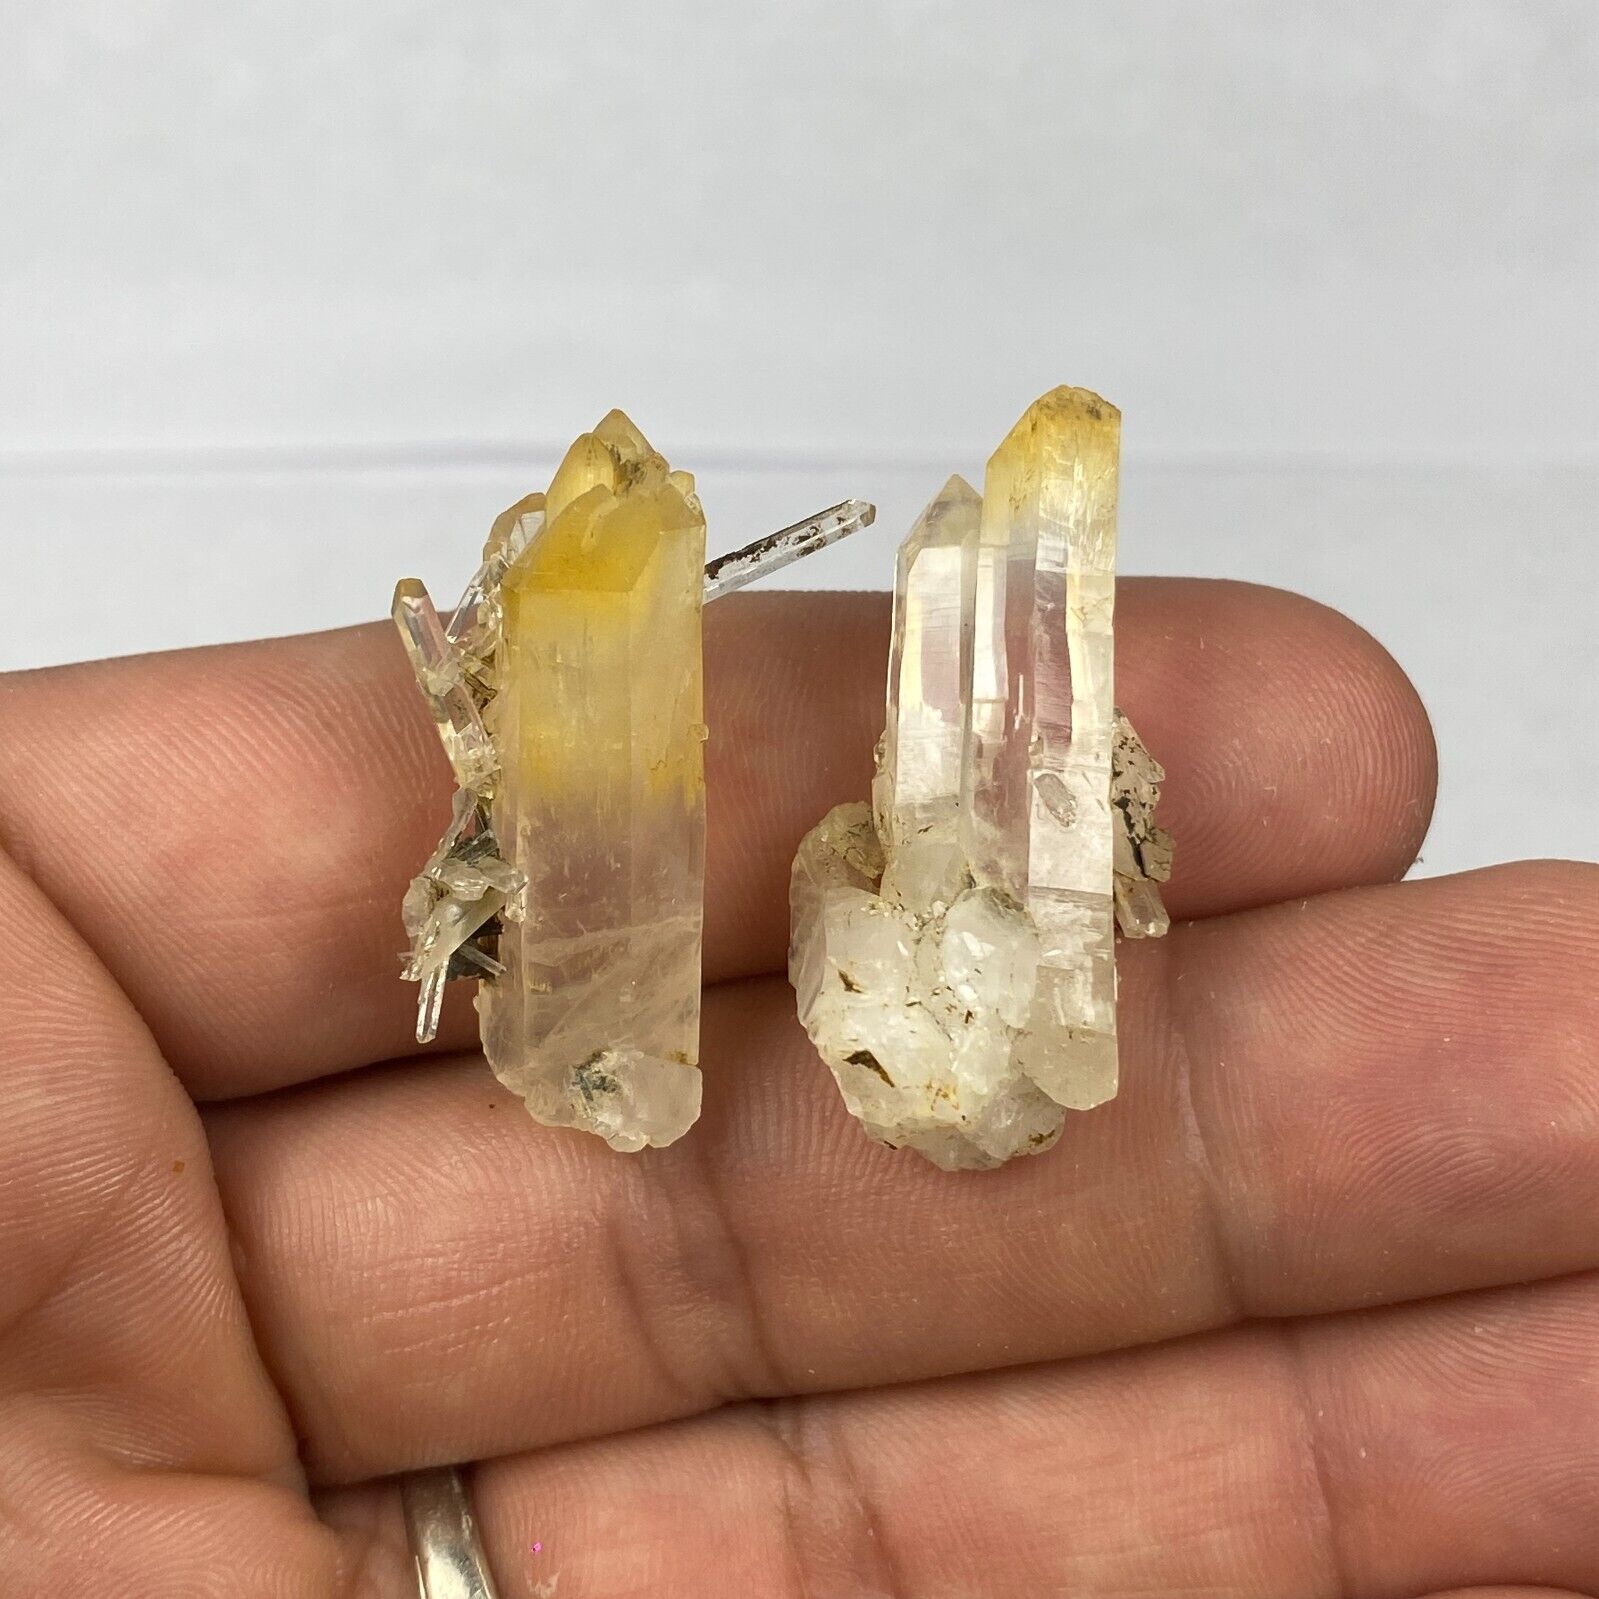 MANGO QUARTZ CRYSTAL LOT OF 2 PIECES FROM COLOMBIA 10.69 gram / 0.377 oz